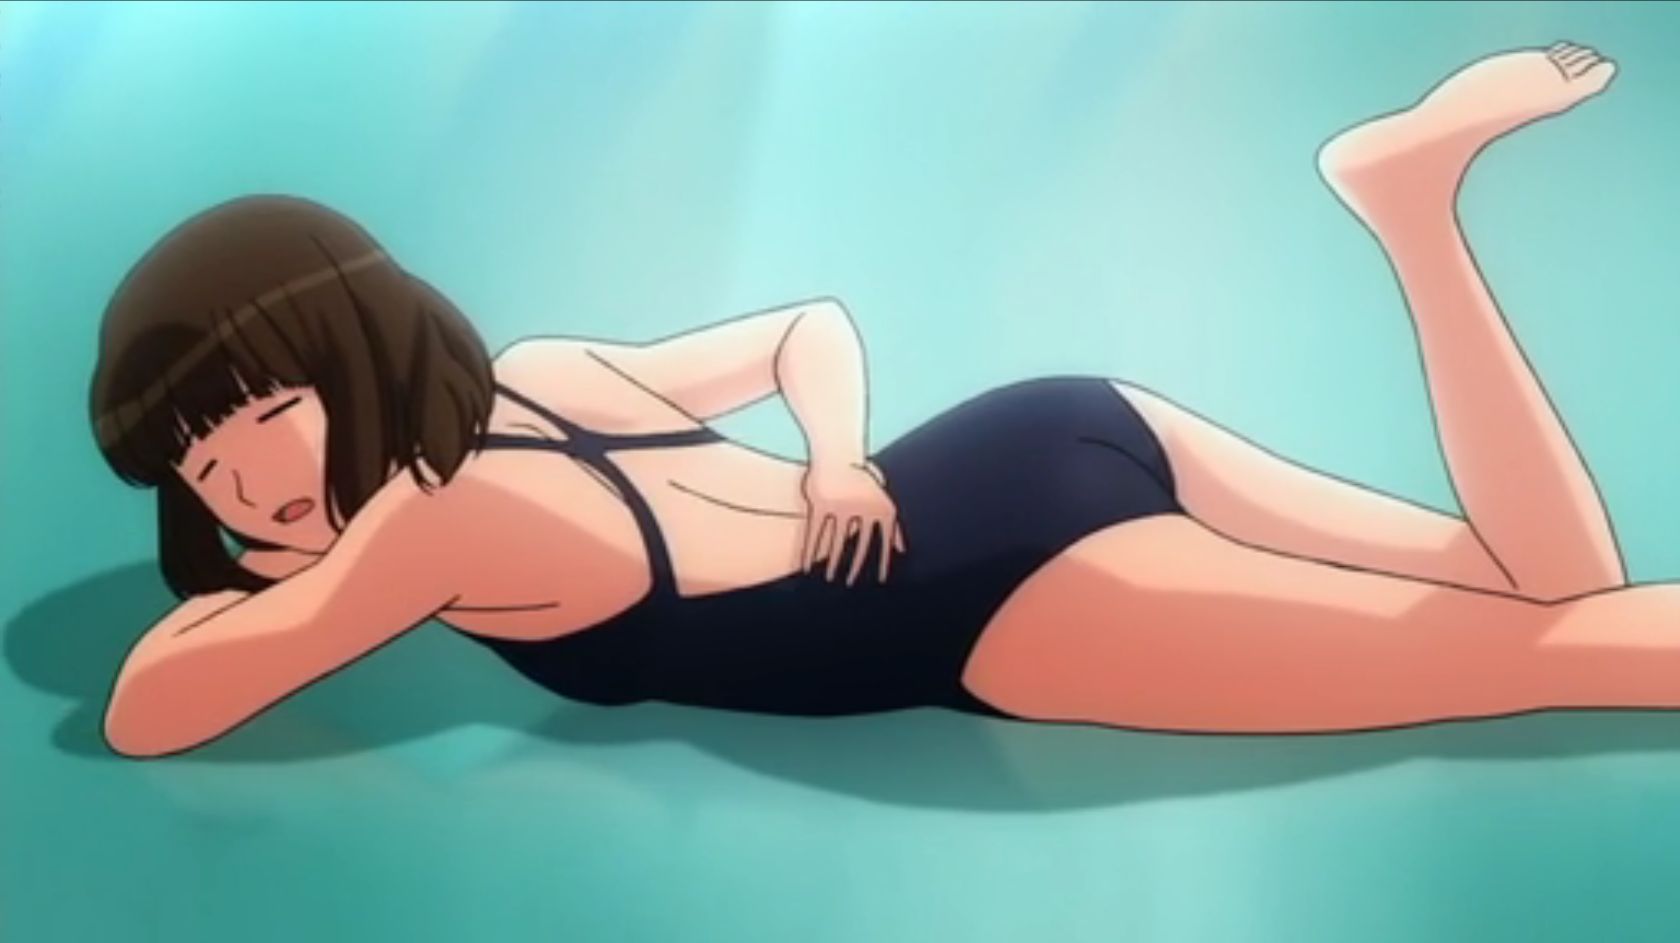 Cute characters "amagami" transcendence erotic illustrations images of the wwwwwww 39